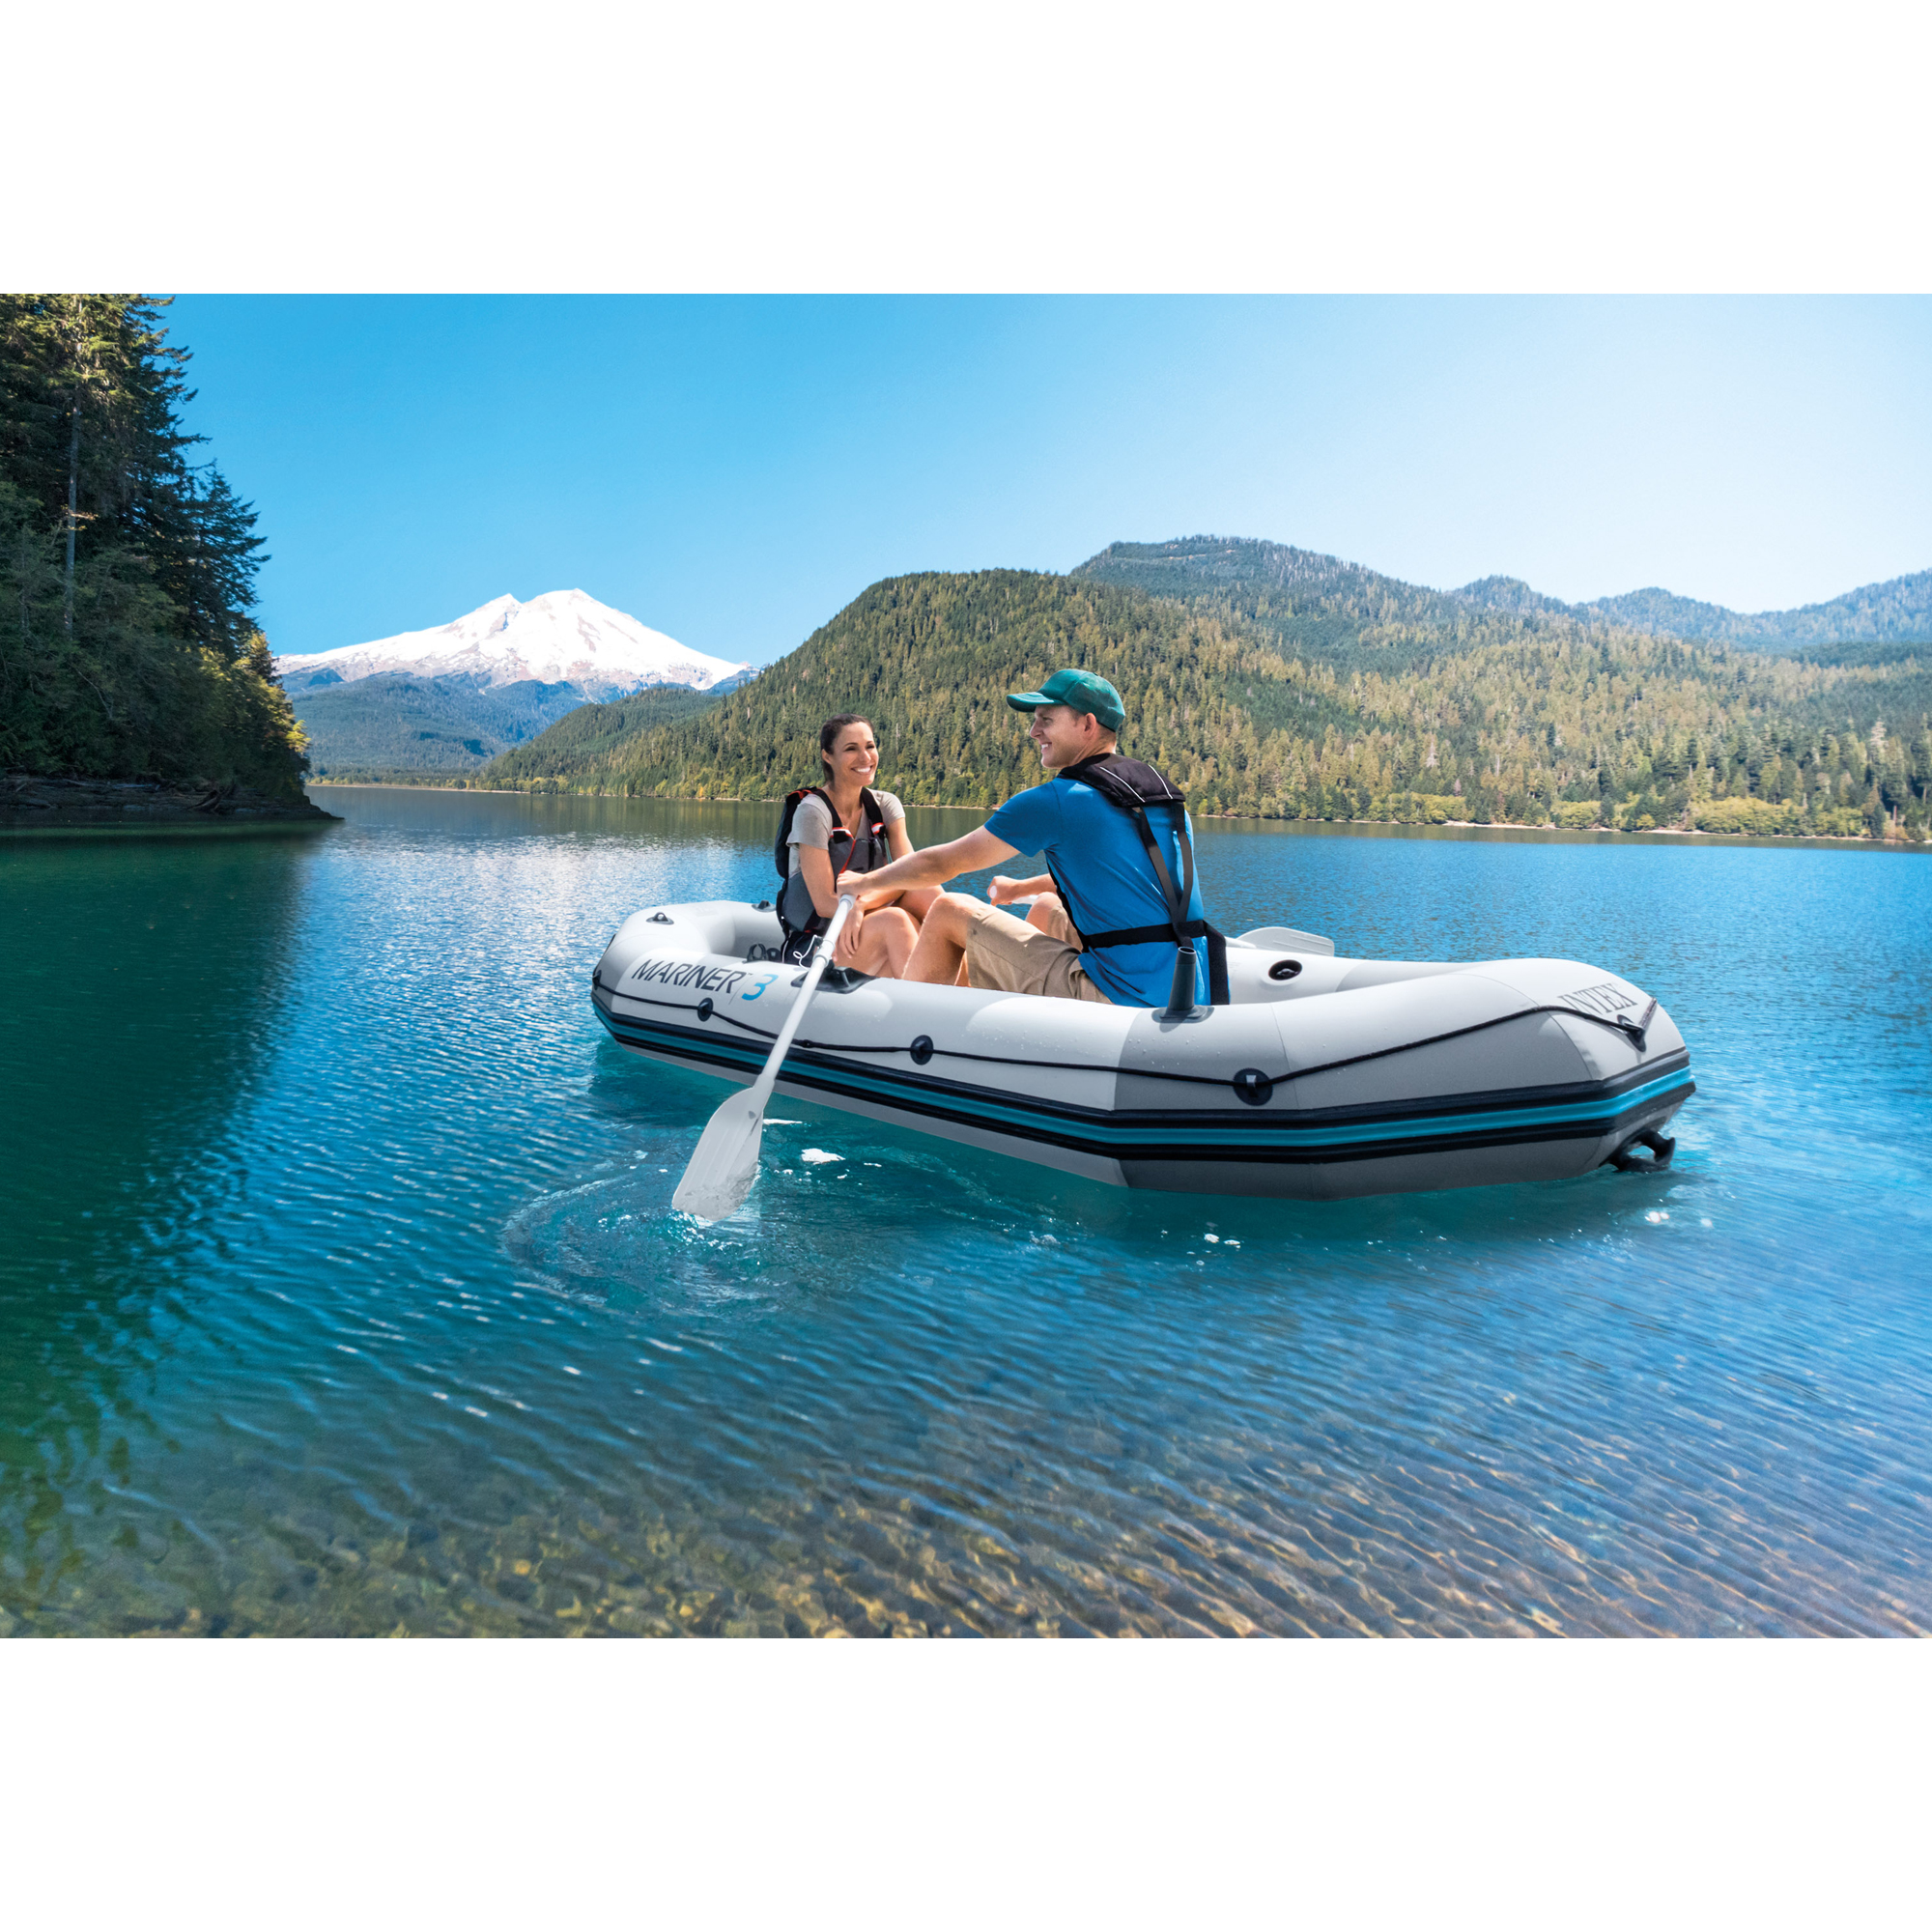 Intex Mariner 3, 3-Person Inflatable River/Lake Dinghy Boat & Oars Set - image 5 of 12